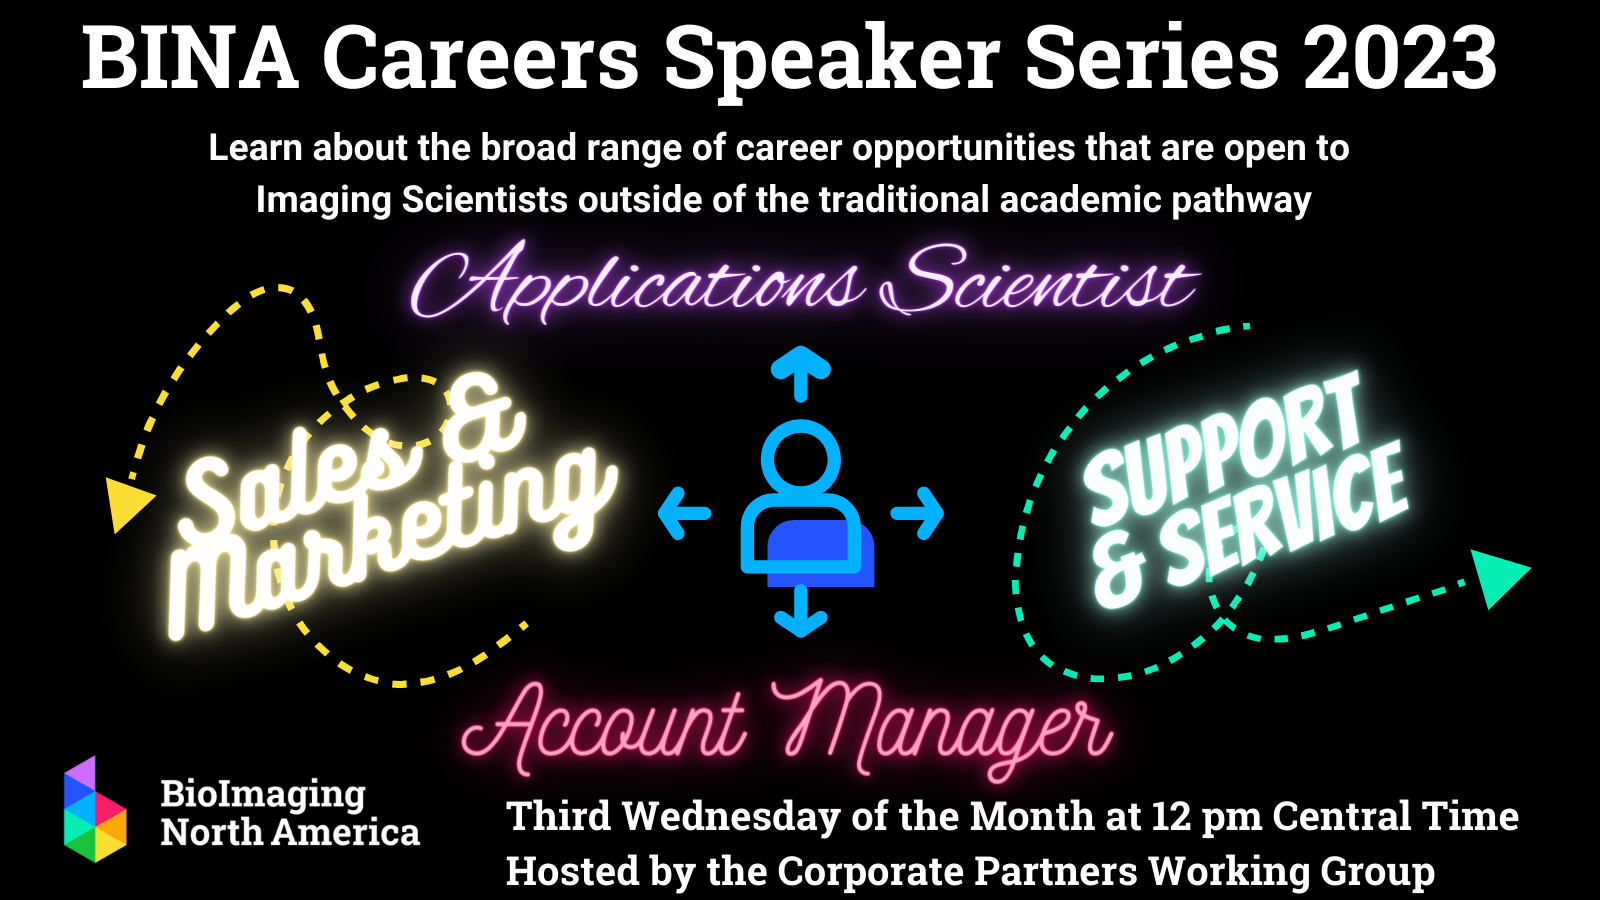 Flyer for the BINA Careers Speaker Series for 2023 - center of the flyer has a person with arrows going up, down, left and right pointing at Applications Scientist, Account Manager, Sales & Marketing, Support & Service, respectively.